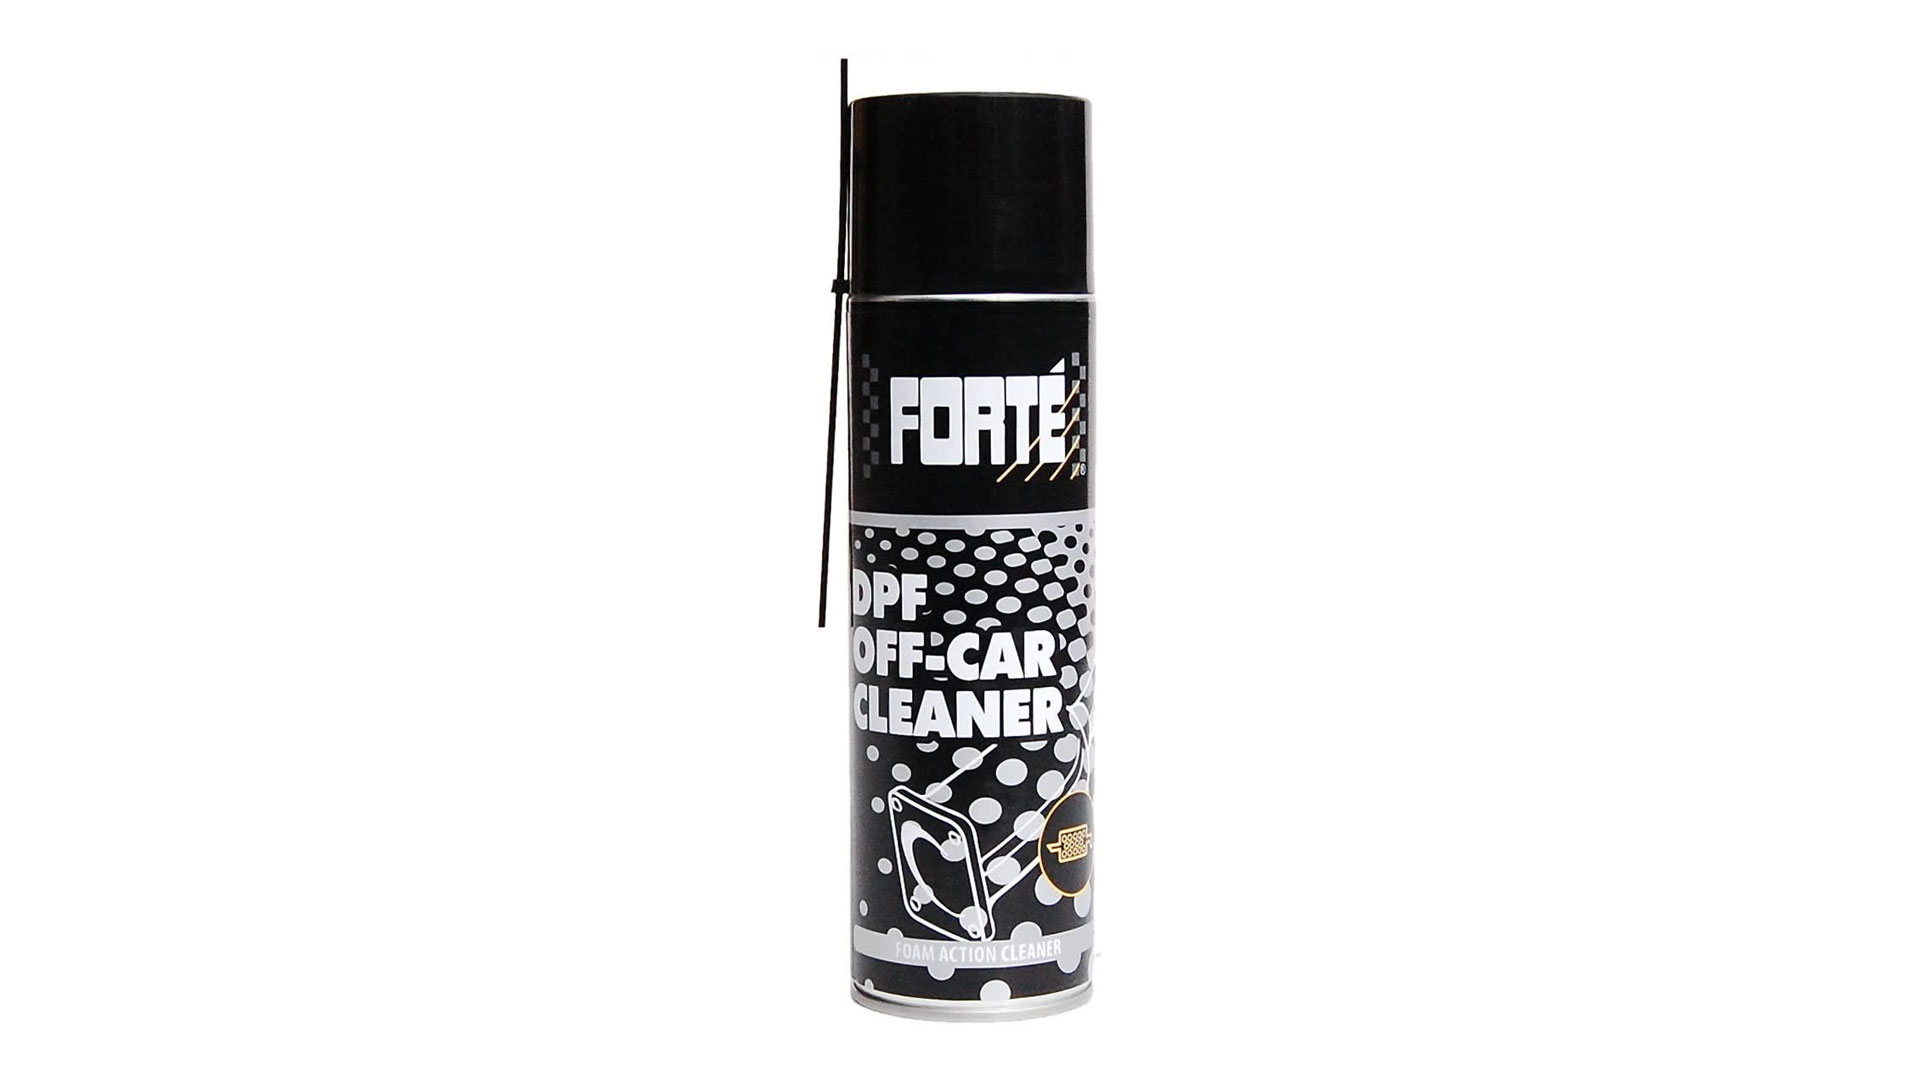 forte off car dpf cleaner